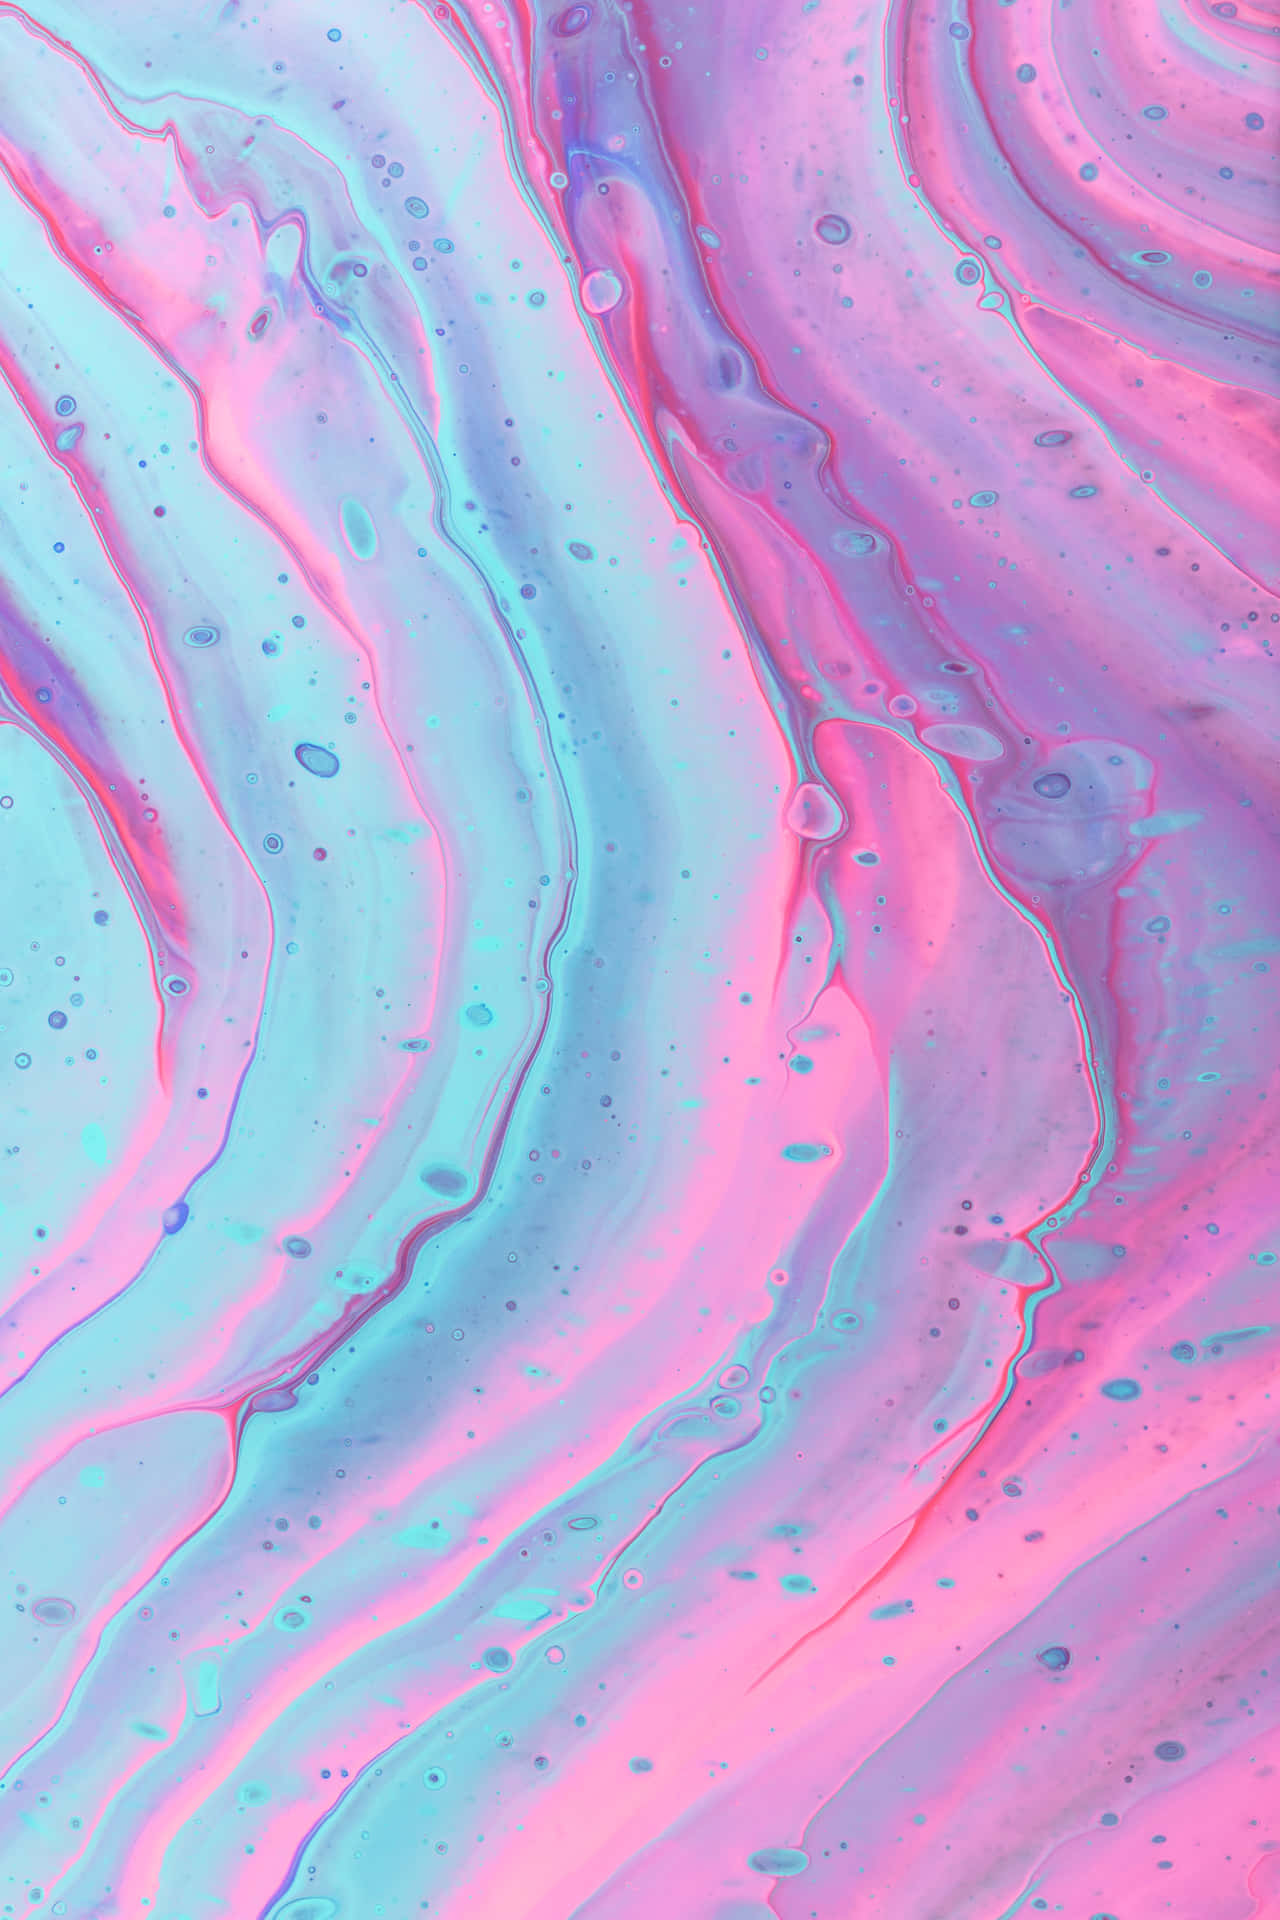 A Pink And Blue Liquid With Swirls Wallpaper